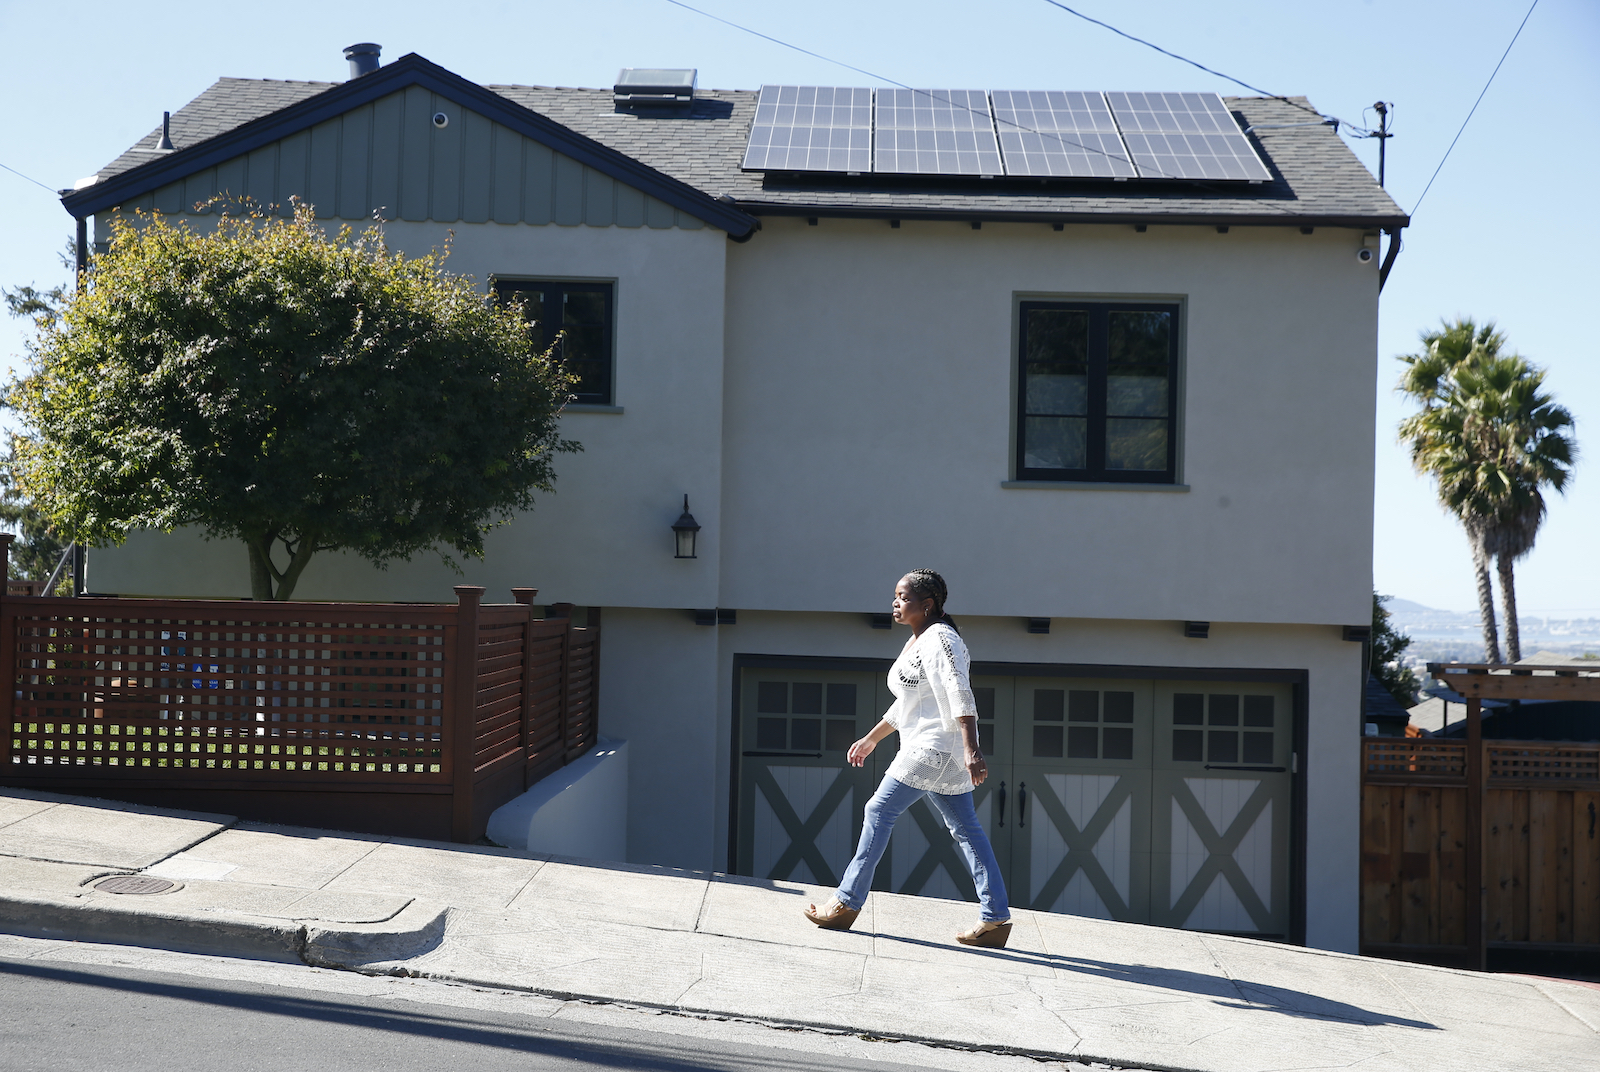 A woman walks past a home with solar panels installed on the roof in Oakland, California.